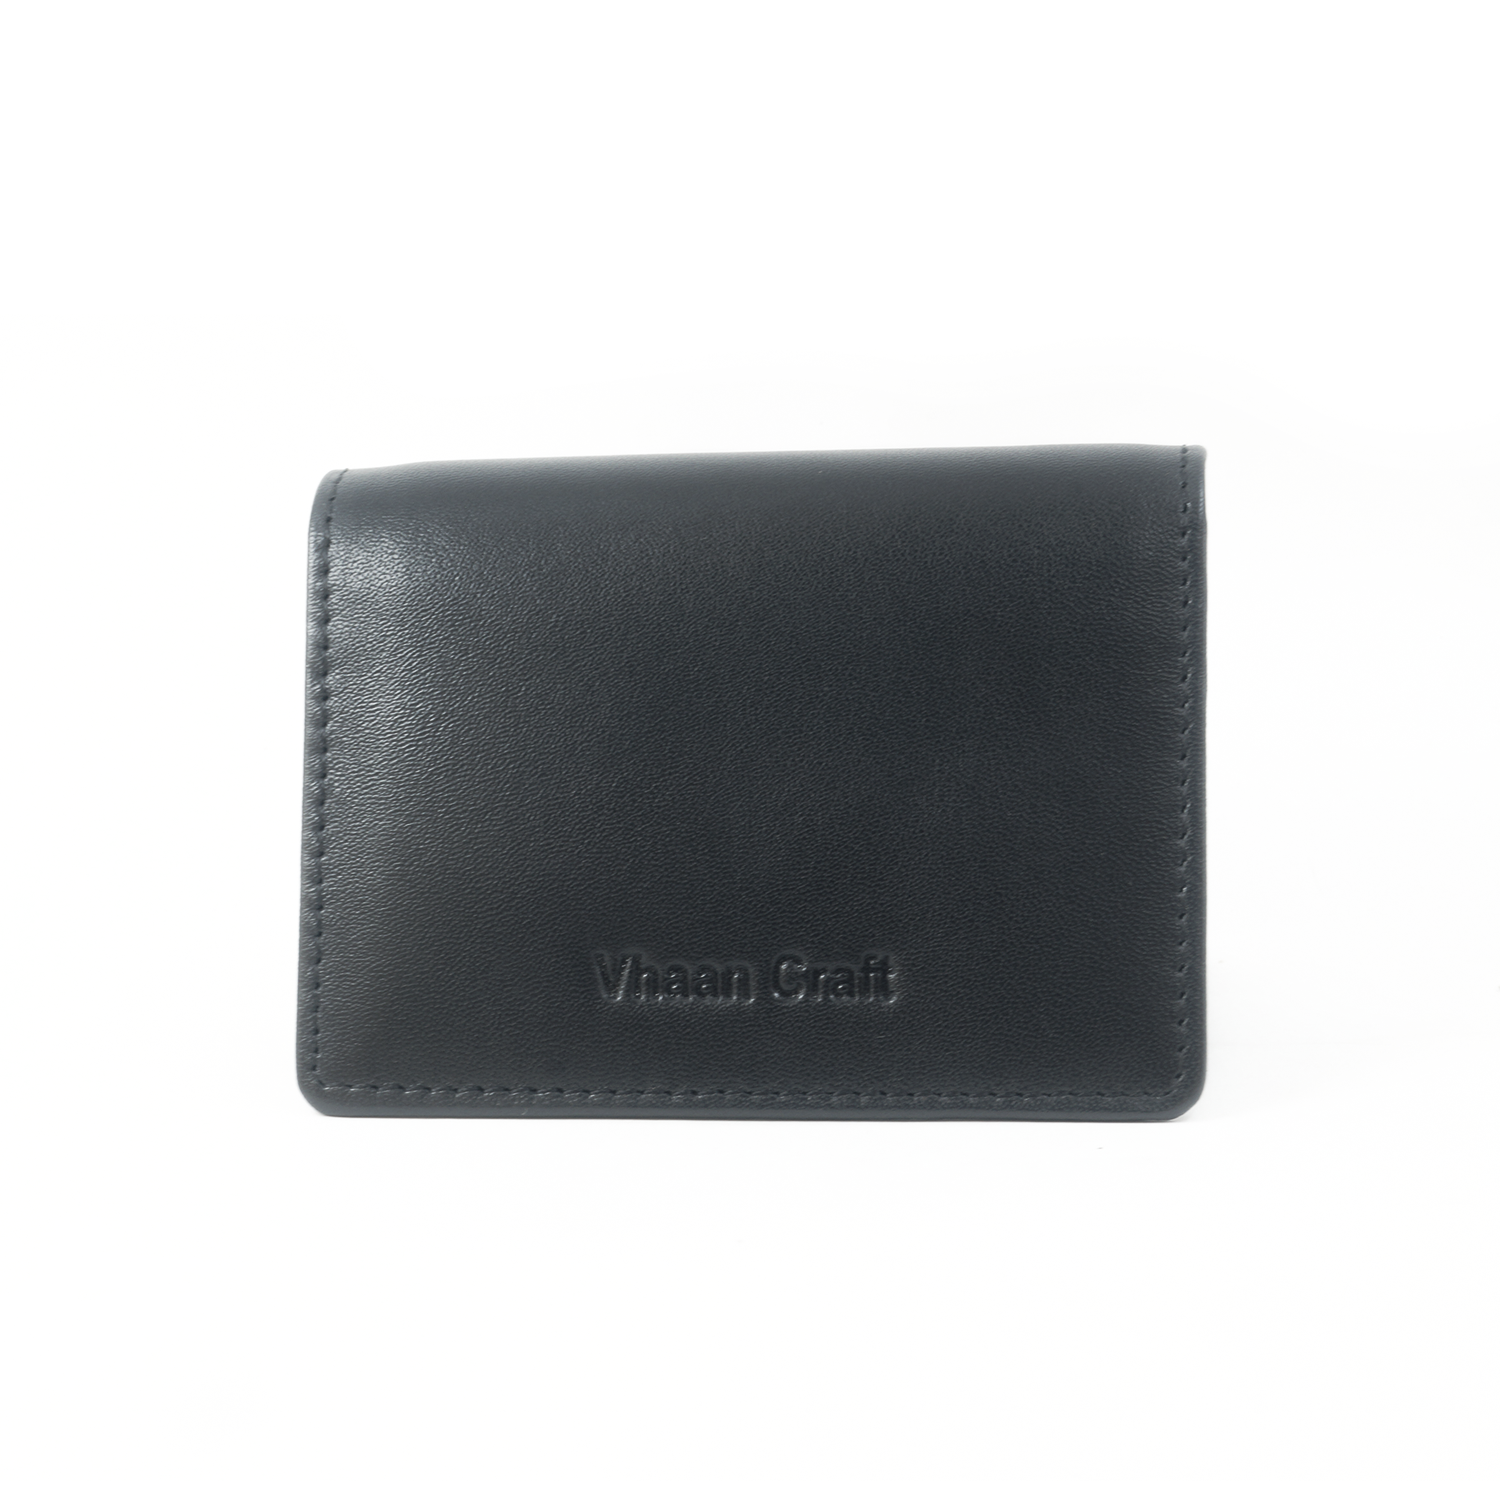 Premium Leather Card Holder with Protective Cover by Vhaan - Black